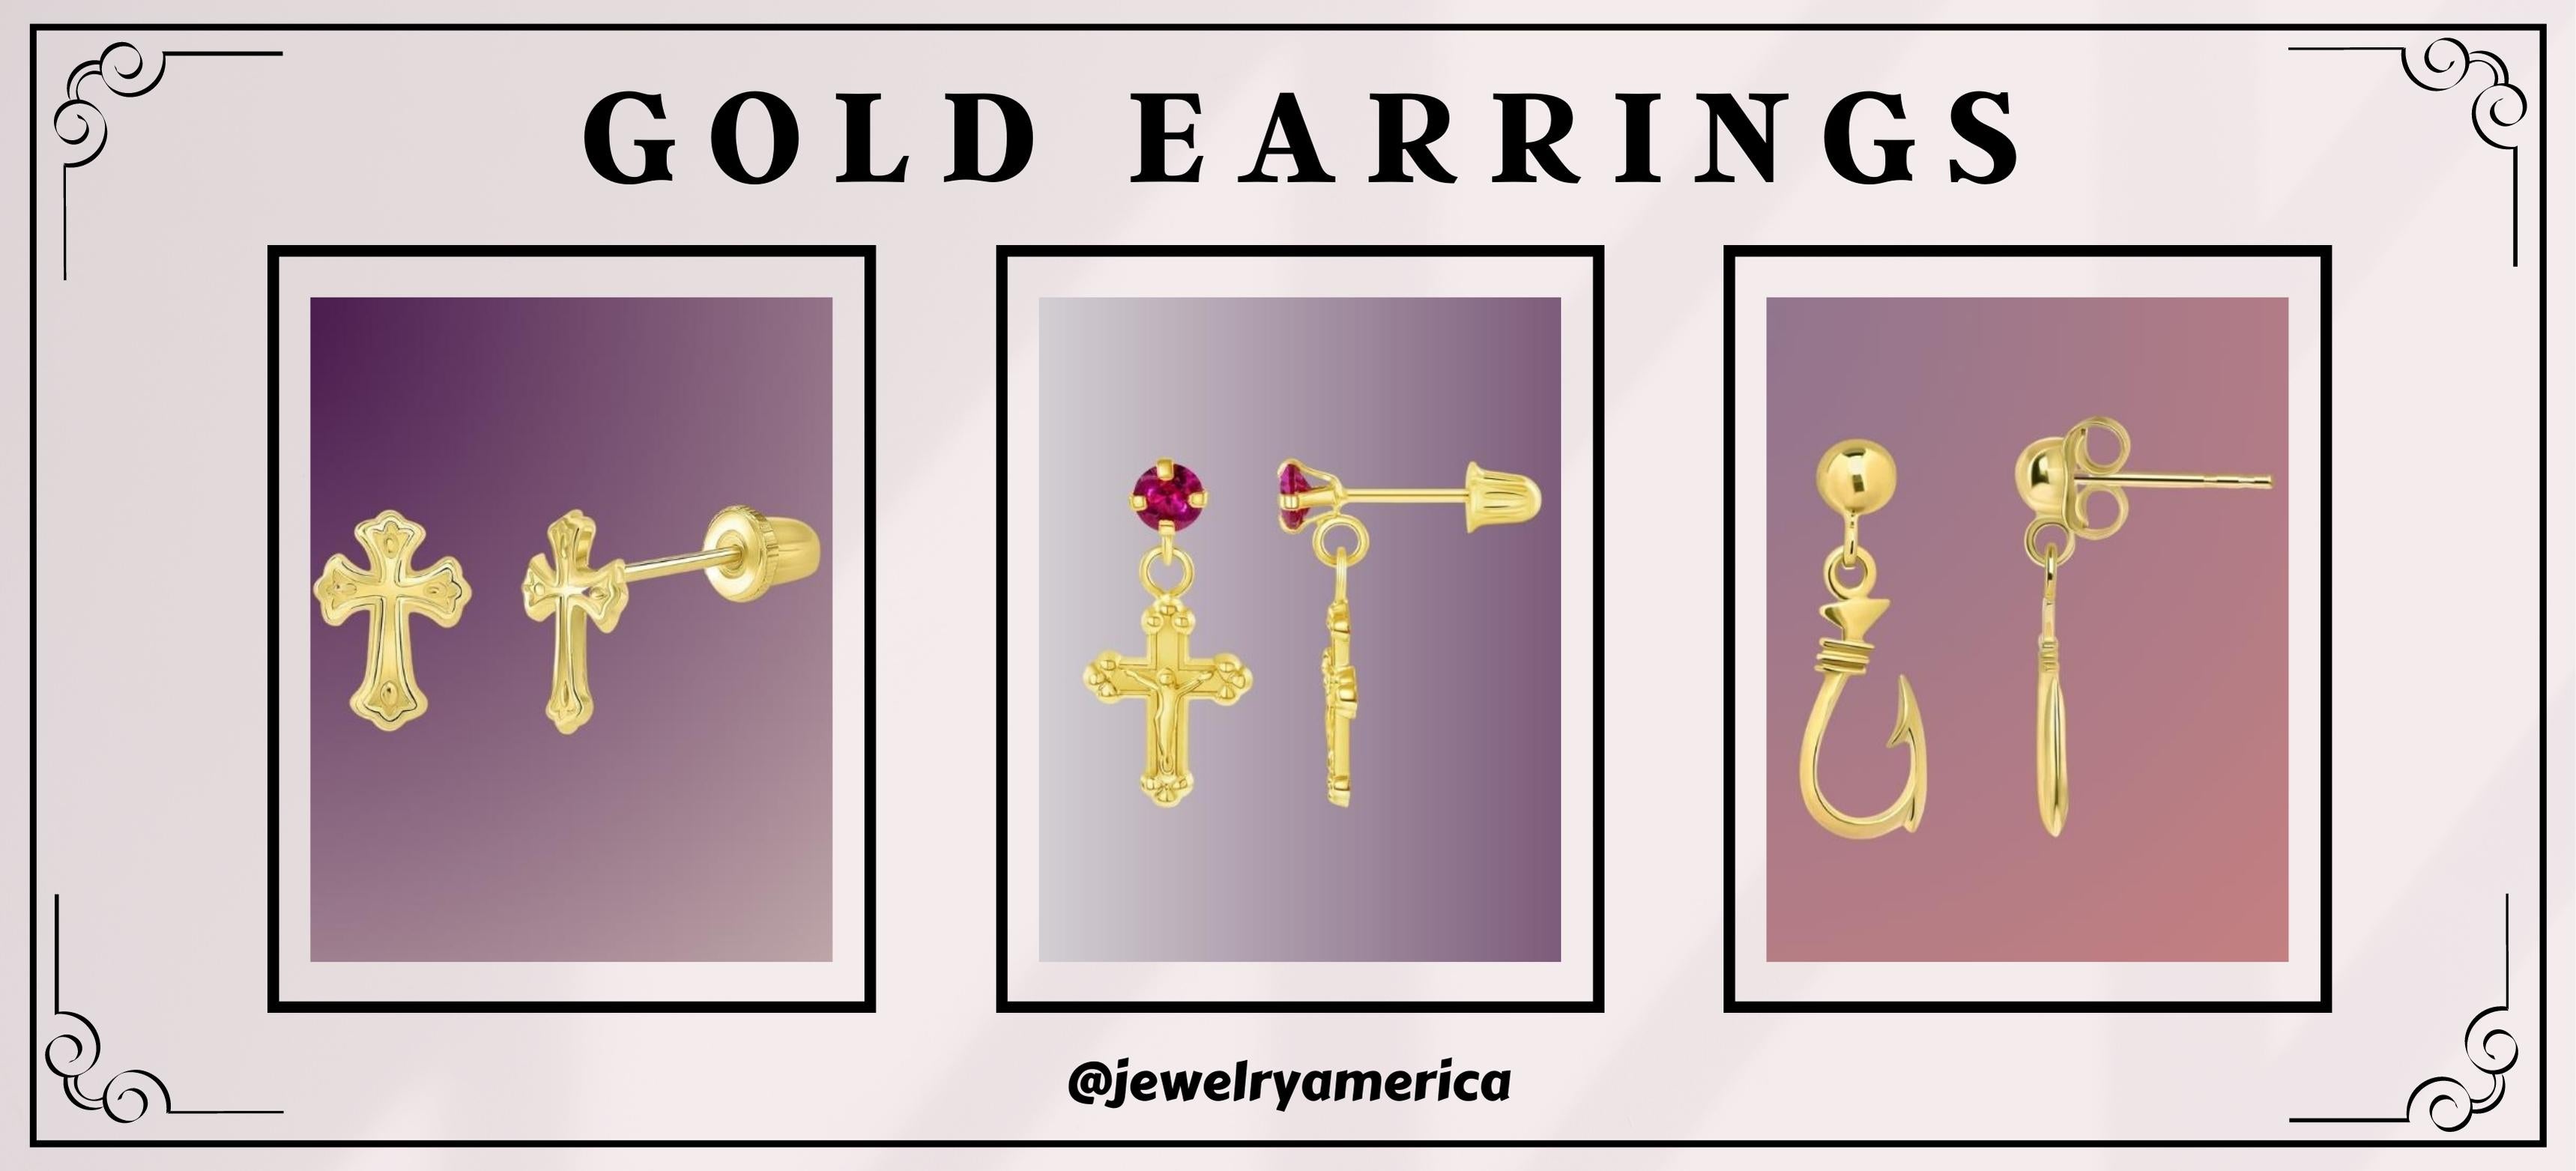 Why Do You Need to Buy Gold Earrings?